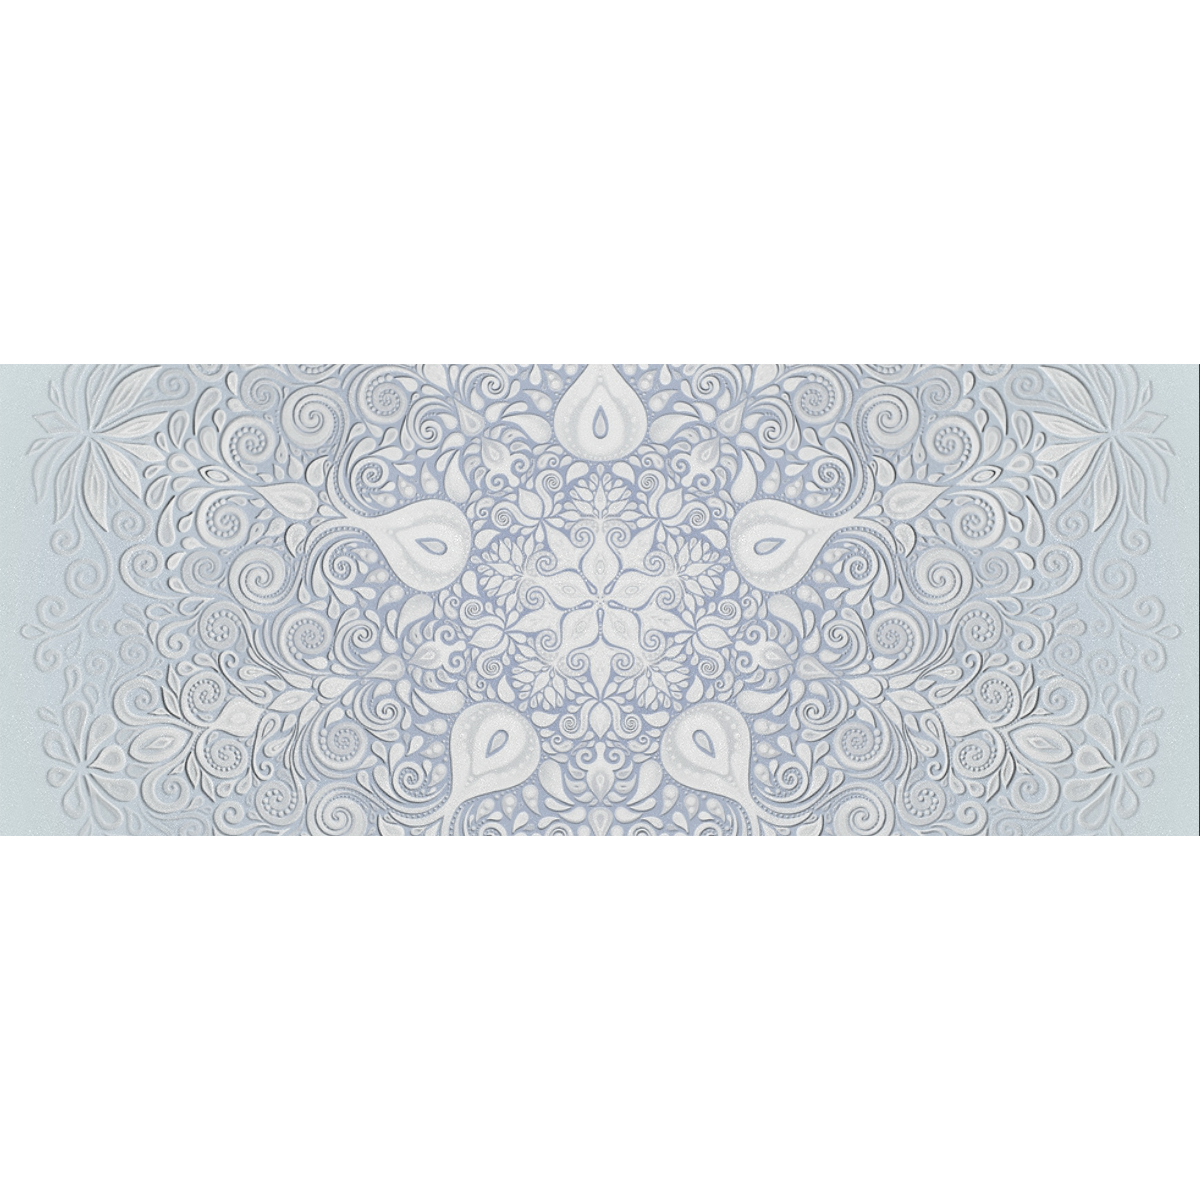 White and Blue Watercolor Mandala Pattern Gift Wrapping Paper 58"x 23" (5 Rolls)